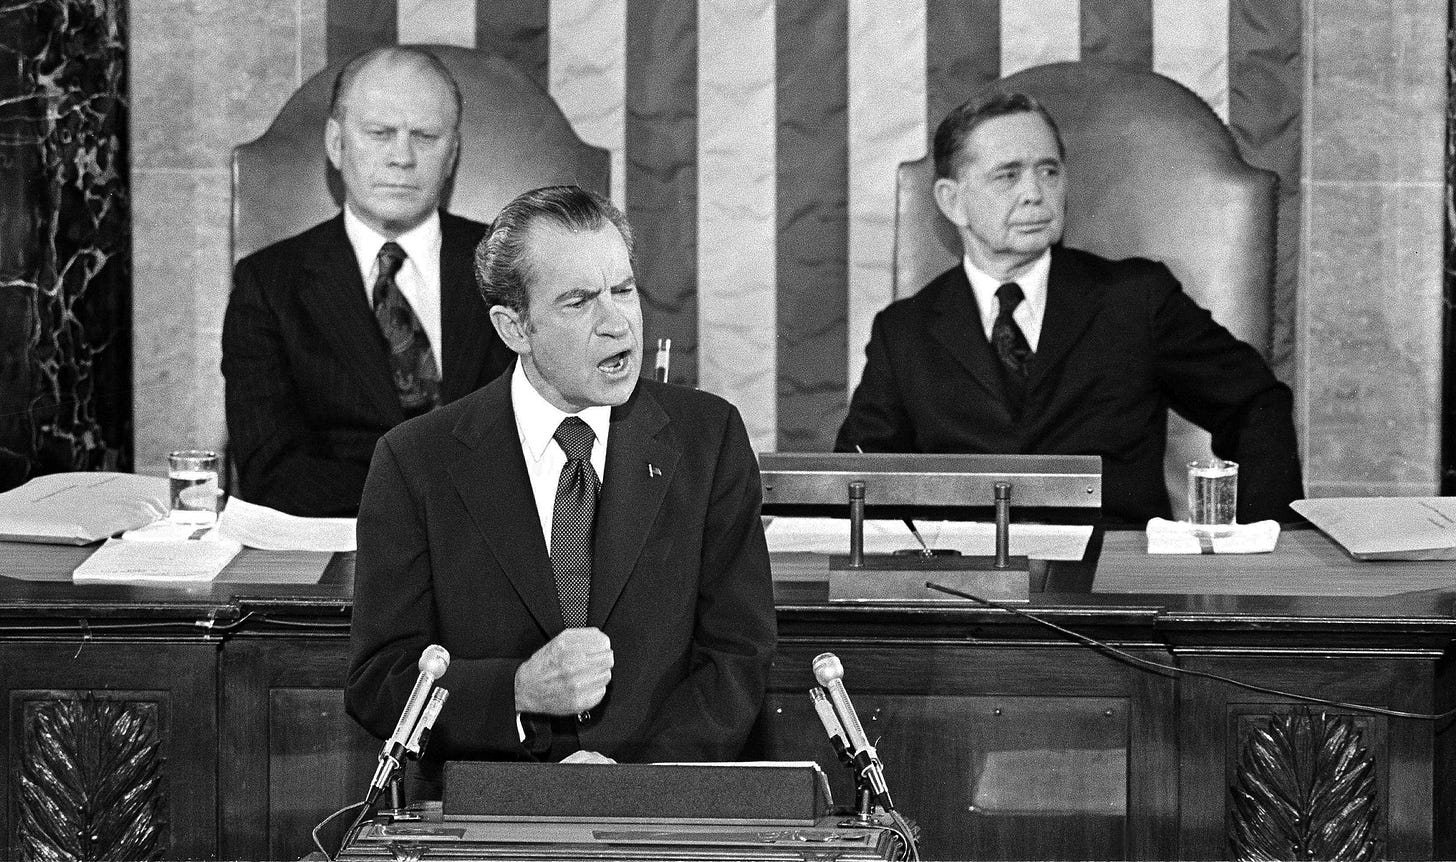 Trump's State of the Union had the same mistake as Nixon's: Ending  investigations of him isn't good for America